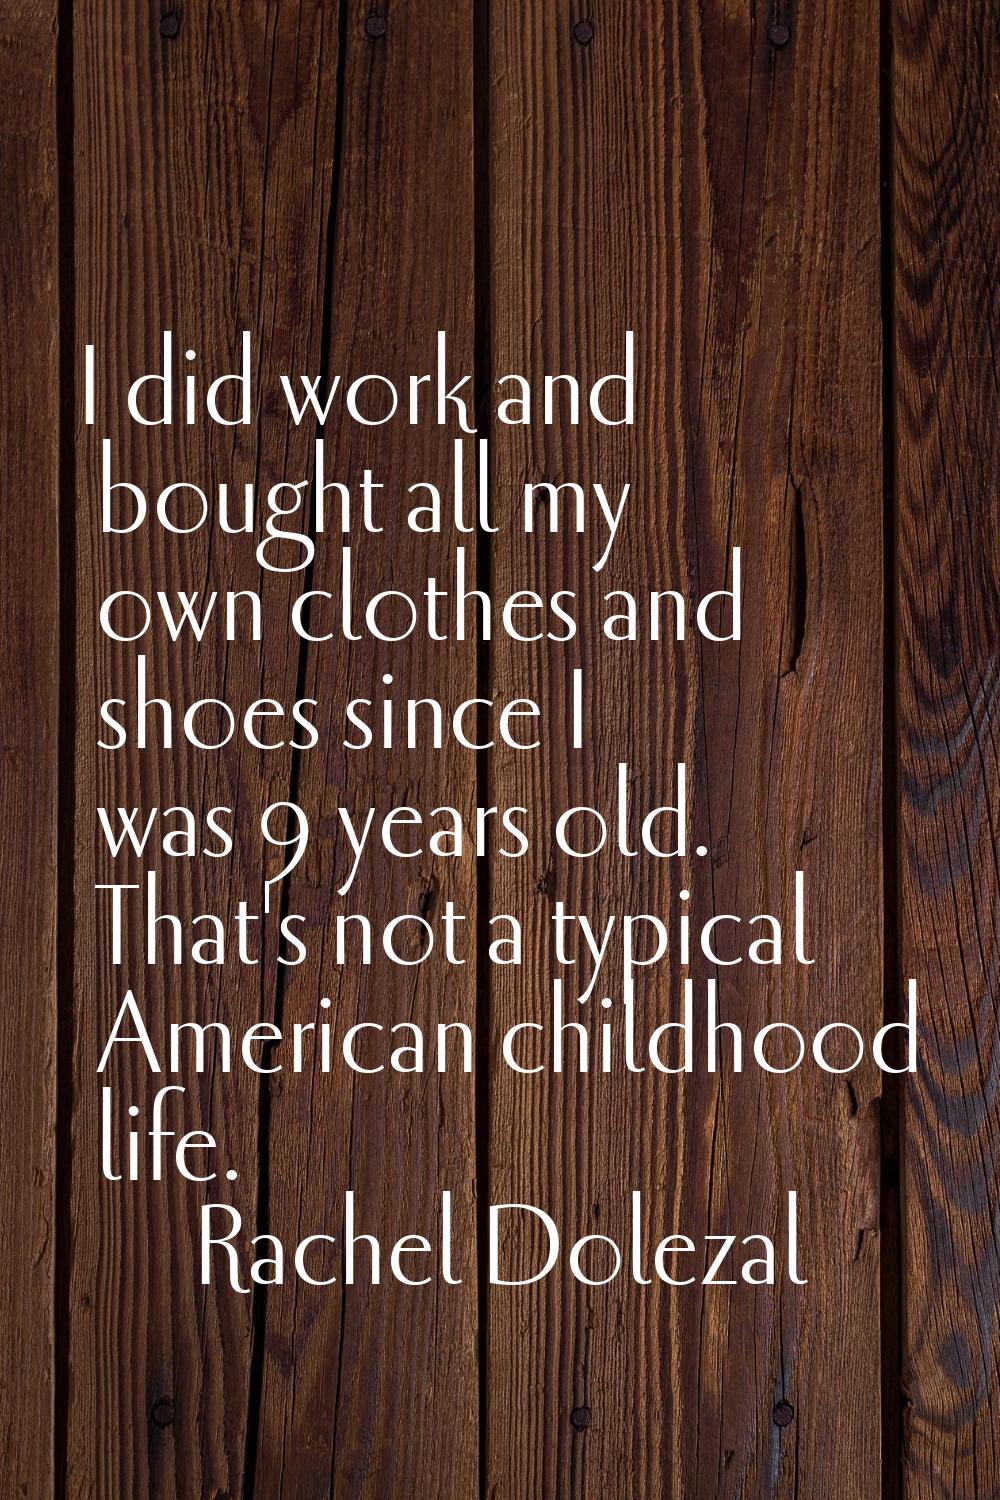 I did work and bought all my own clothes and shoes since I was 9 years old. That's not a typical Am